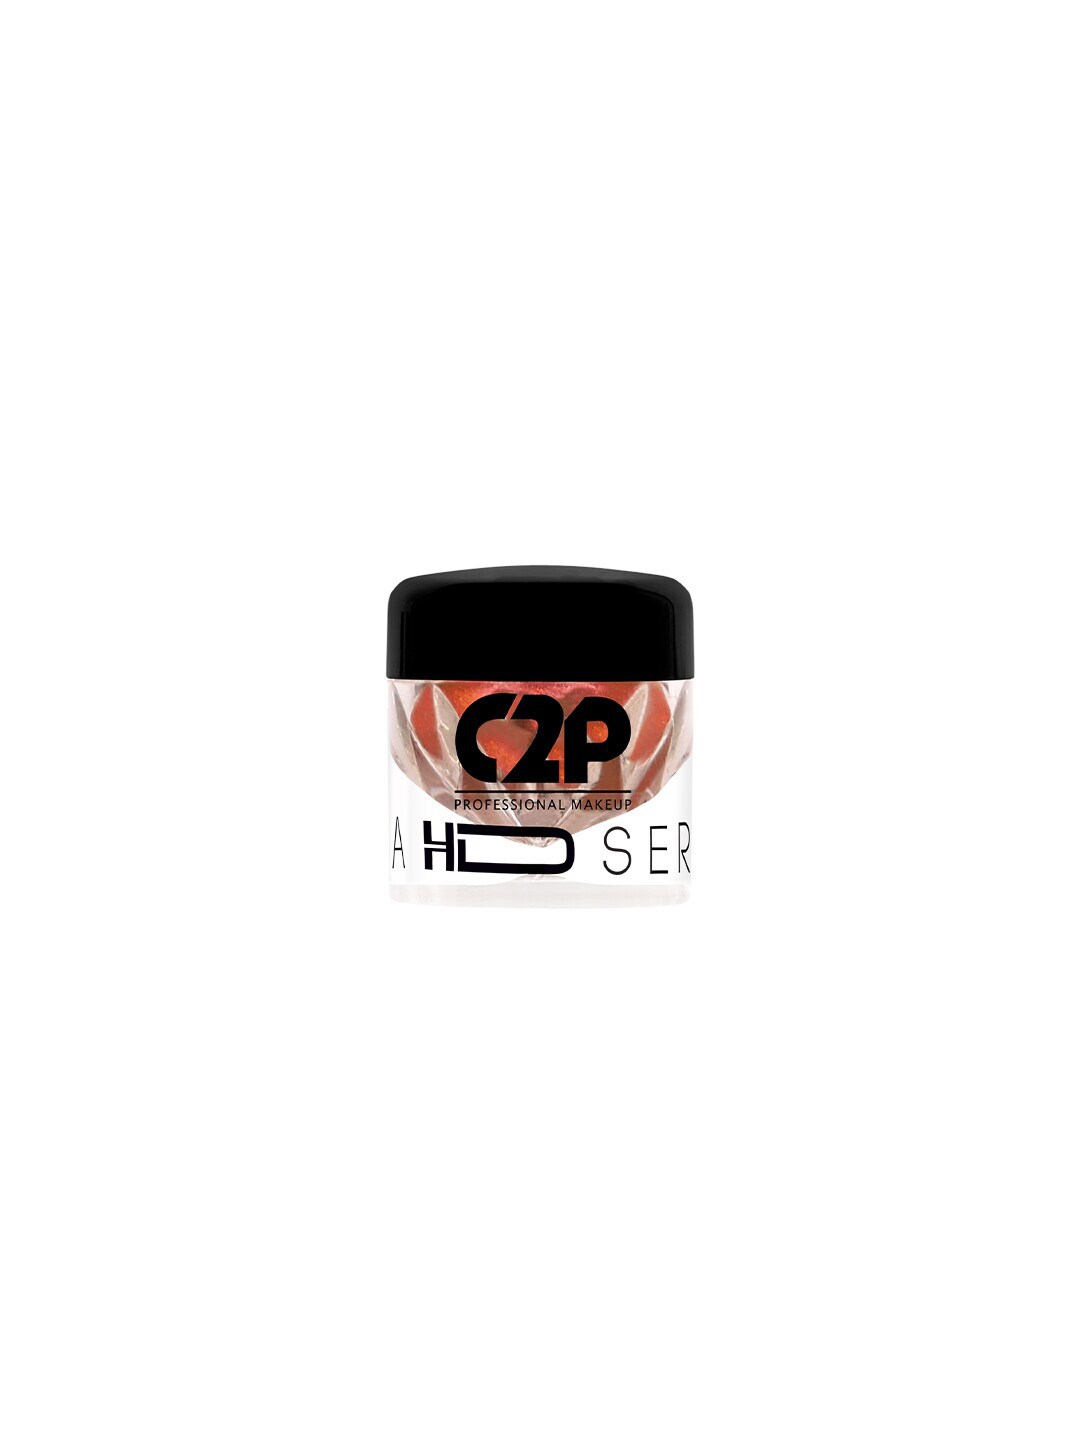 C2P PROFESSIONAL MAKEUP HD Loose Precious Pigments Eyeshadow - Majic Bow 405 Price in India